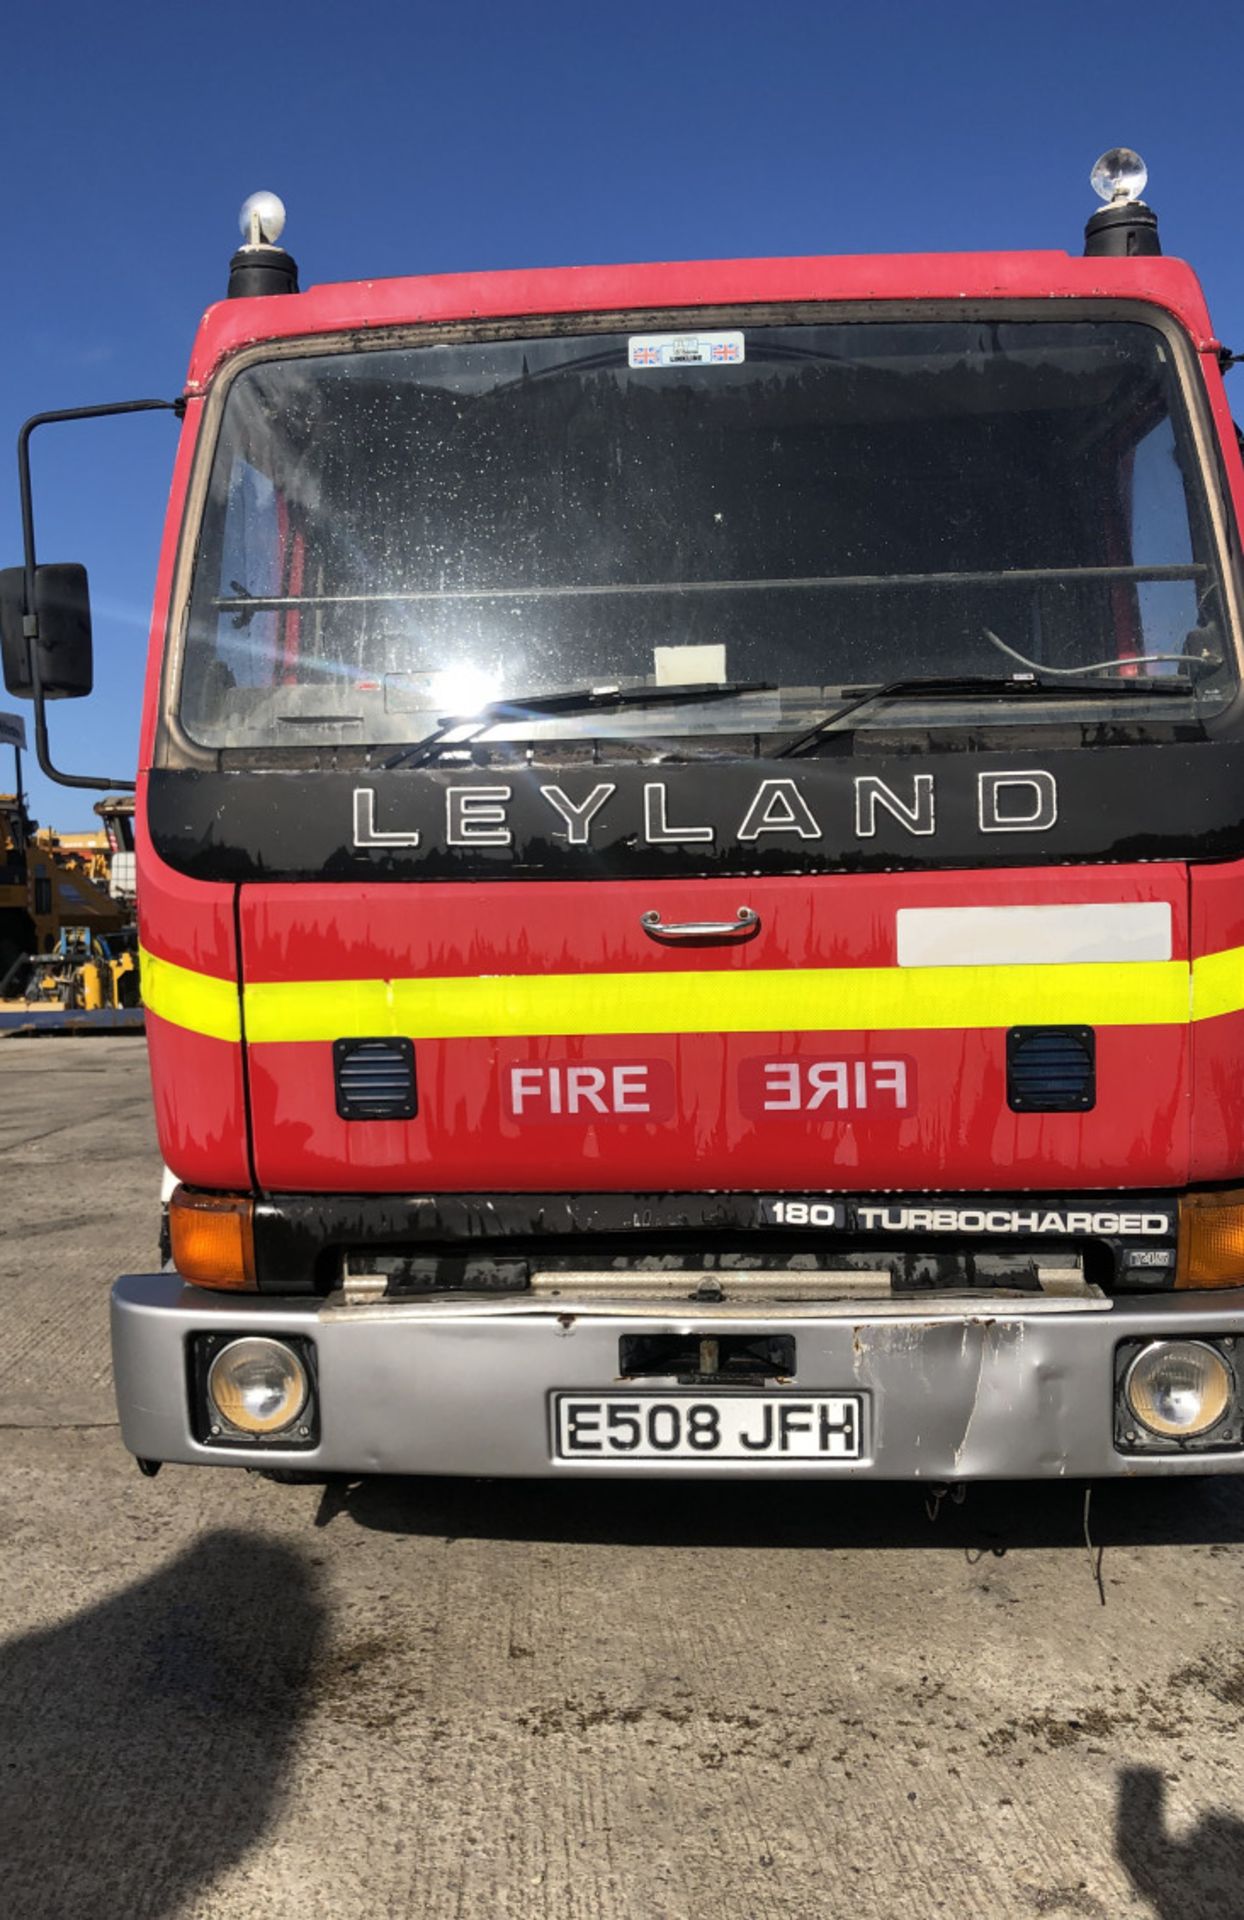 LEYLAND FRIEGHTER 1718 FIRE TENDER TRUCK - Image 10 of 11